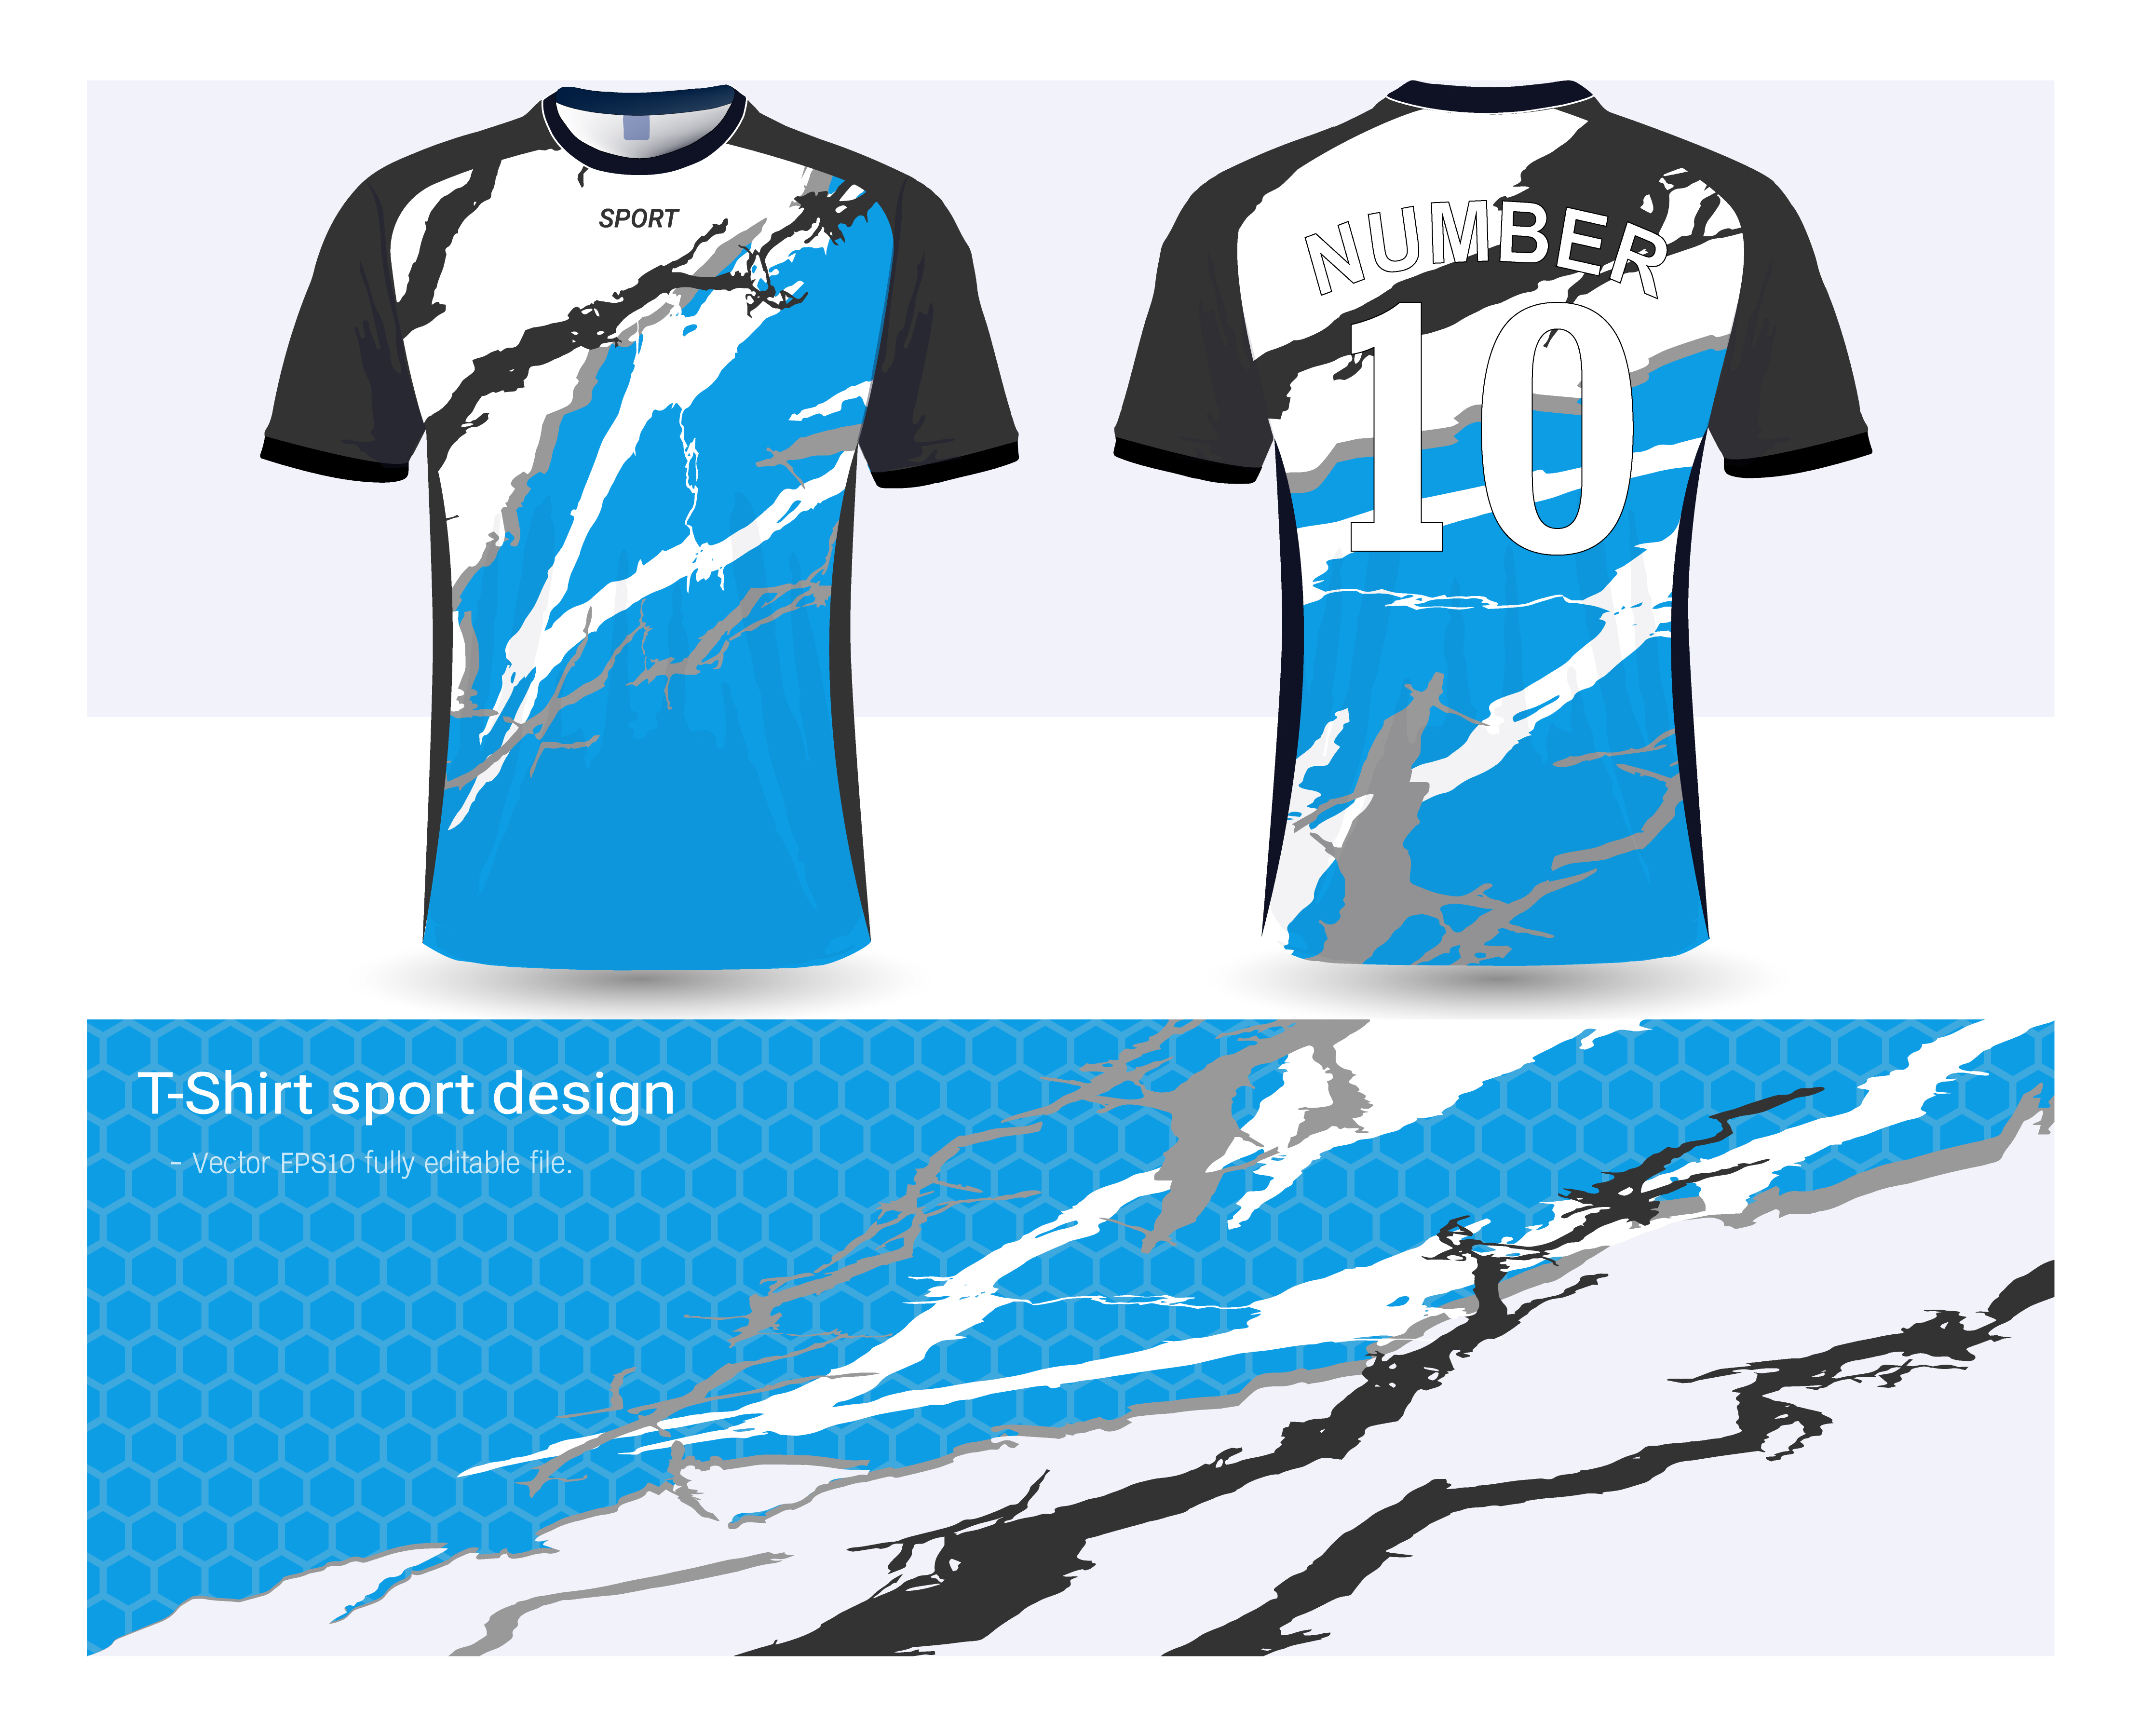 Soccer jersey and t-shirt sport mockup template, Graphic design for ...